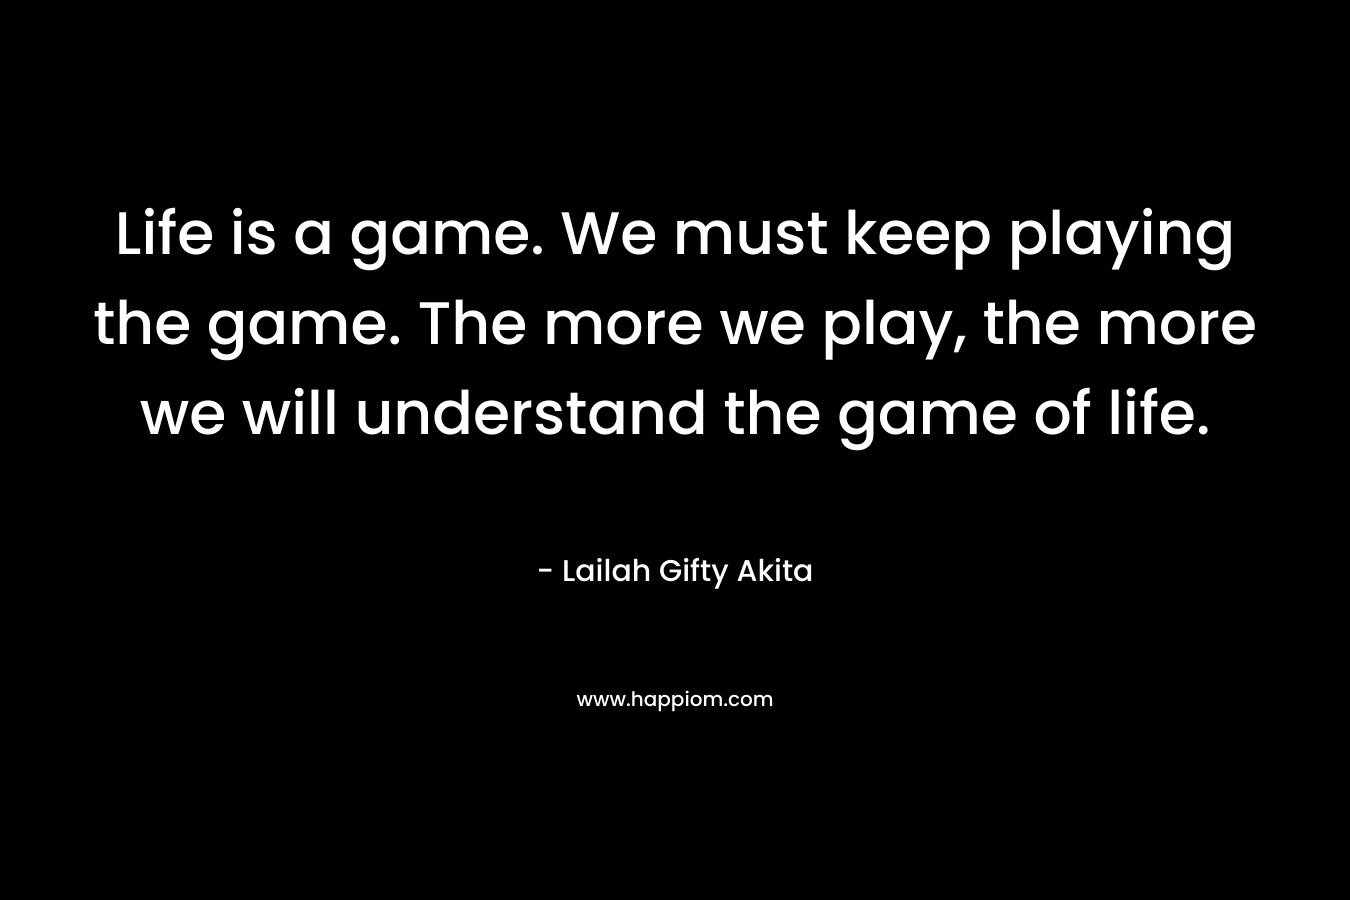 Life is a game. We must keep playing the game. The more we play, the more we will understand the game of life.